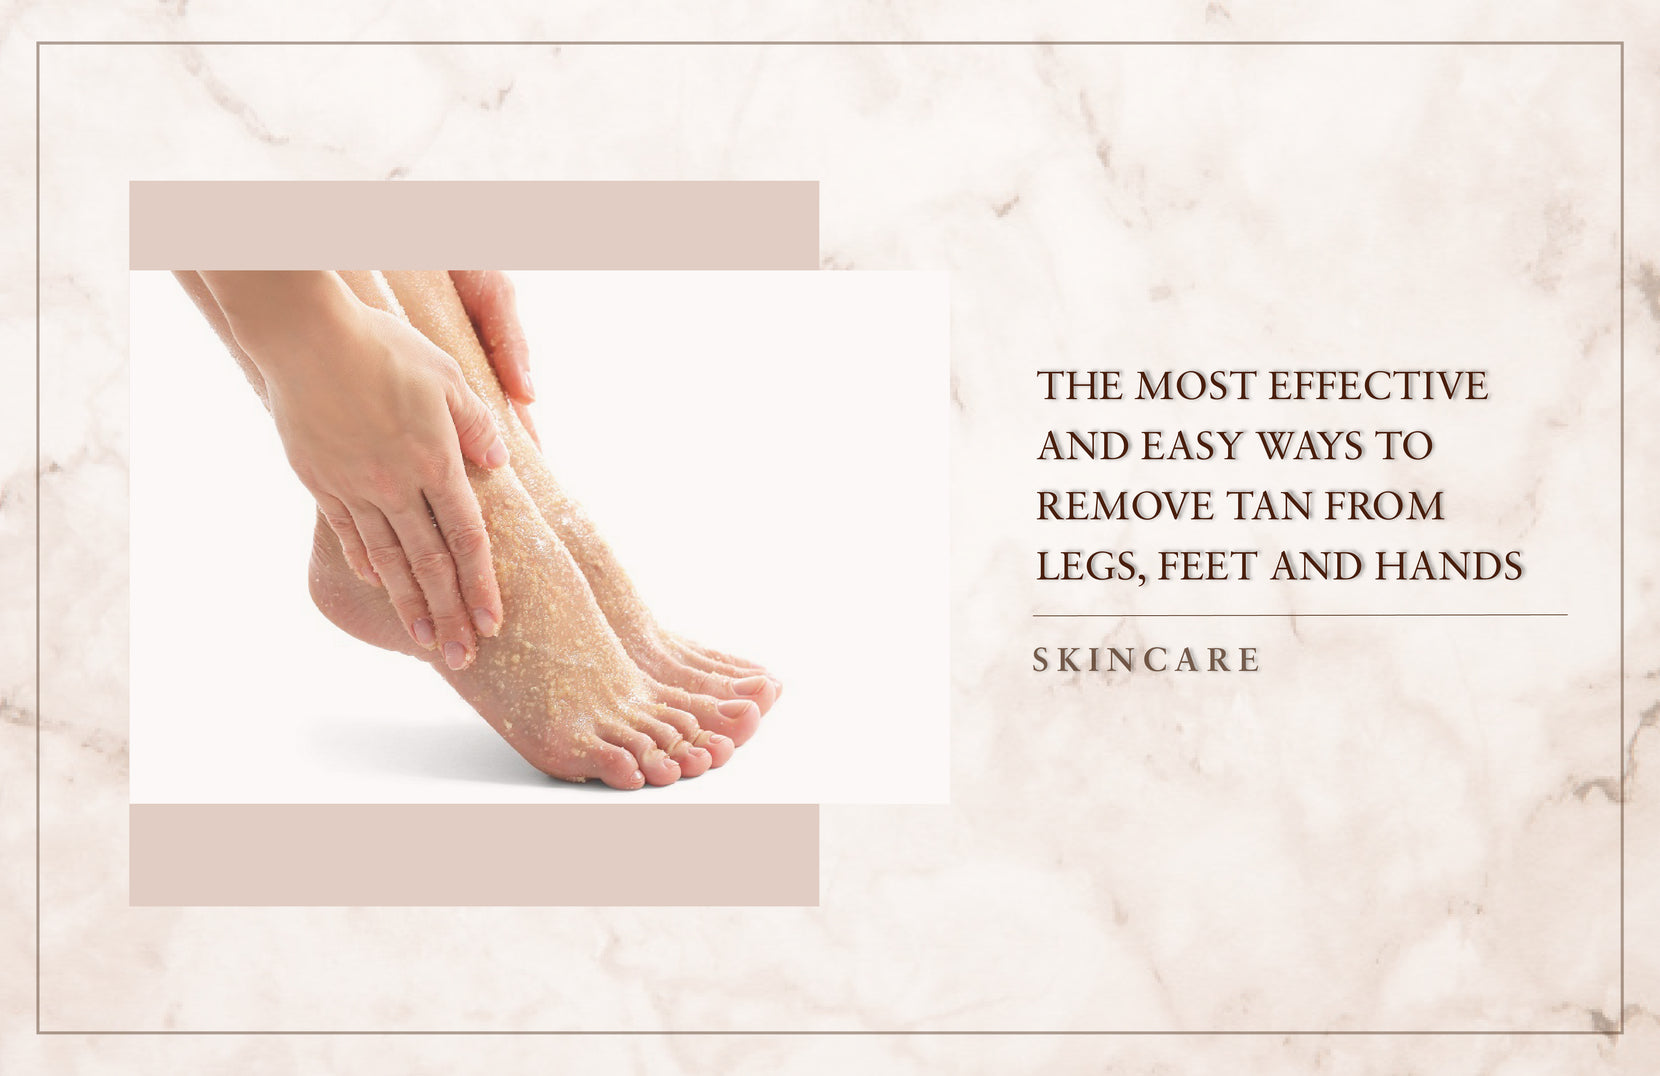 The Most Effective & Easy Ways To Remove Tan From Legs, Feet And Hands